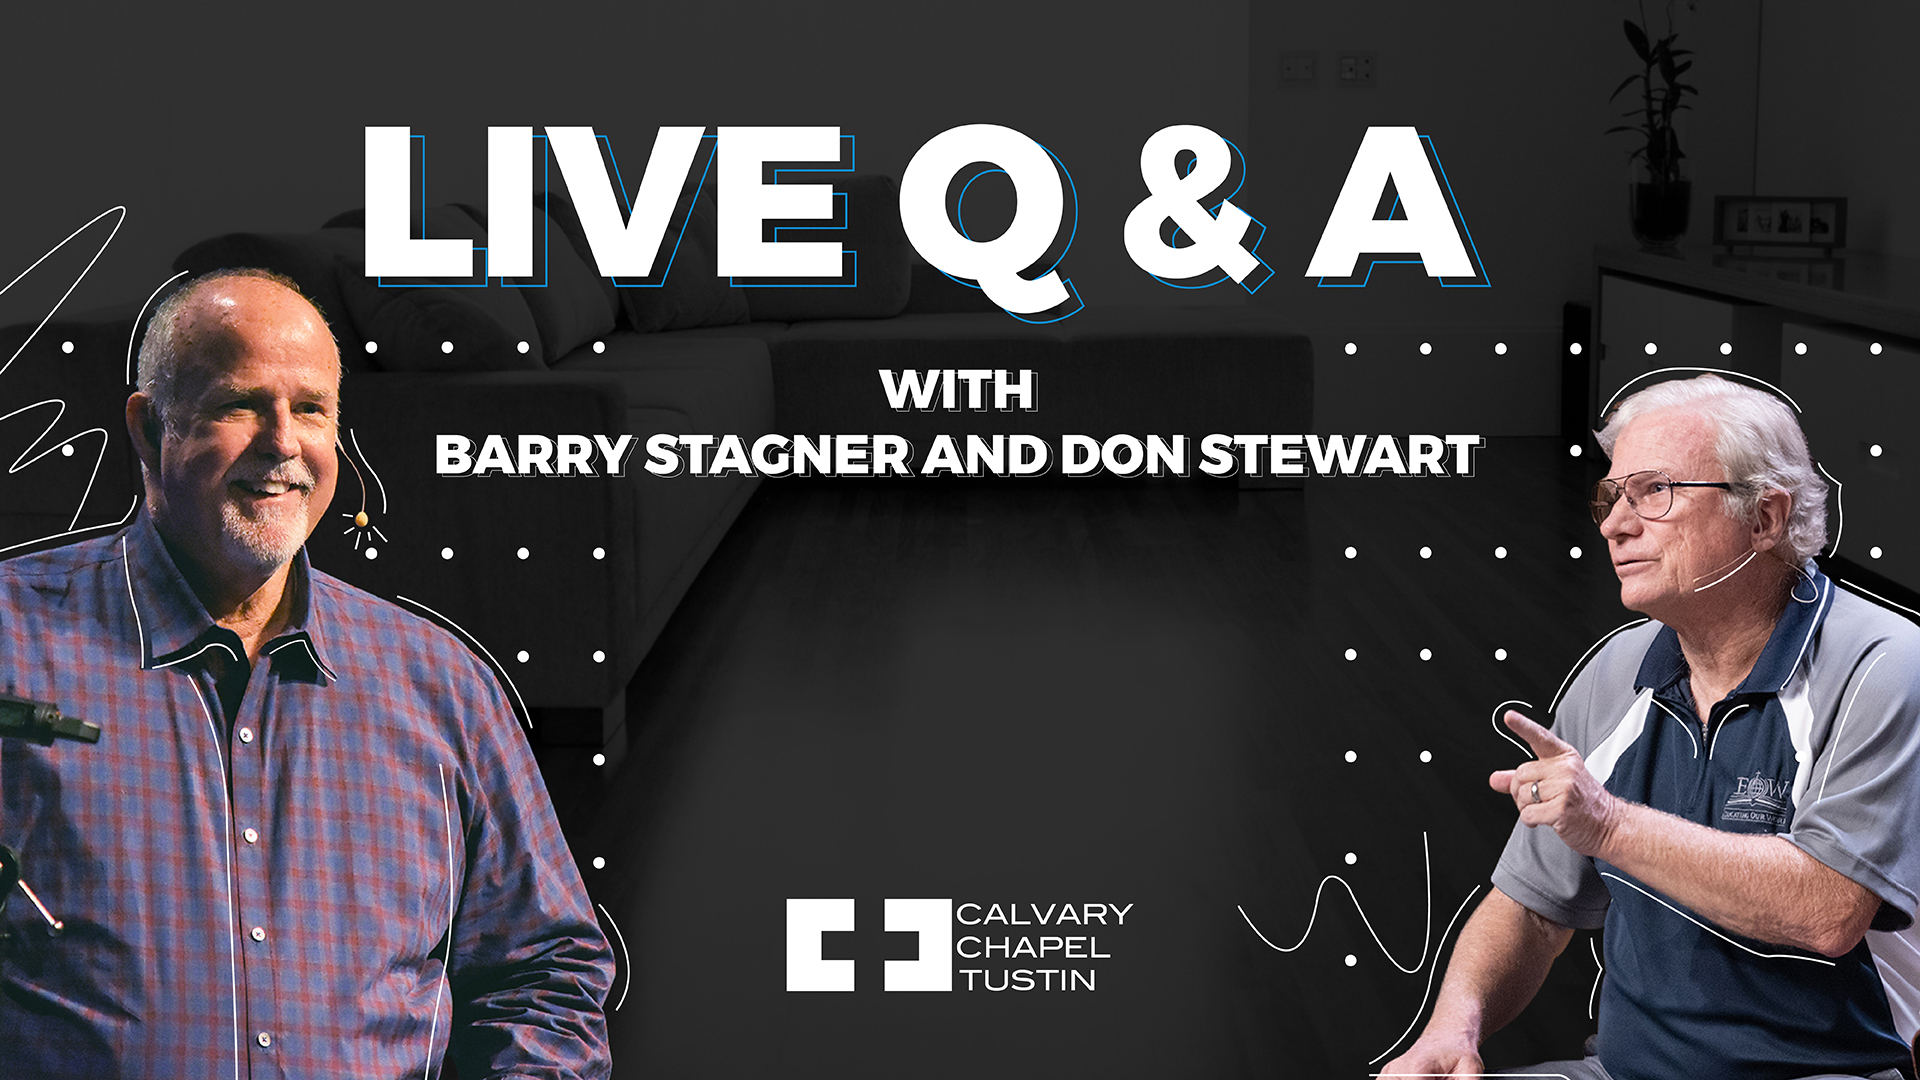 Live QA with Barry Stagner and Don Stewart